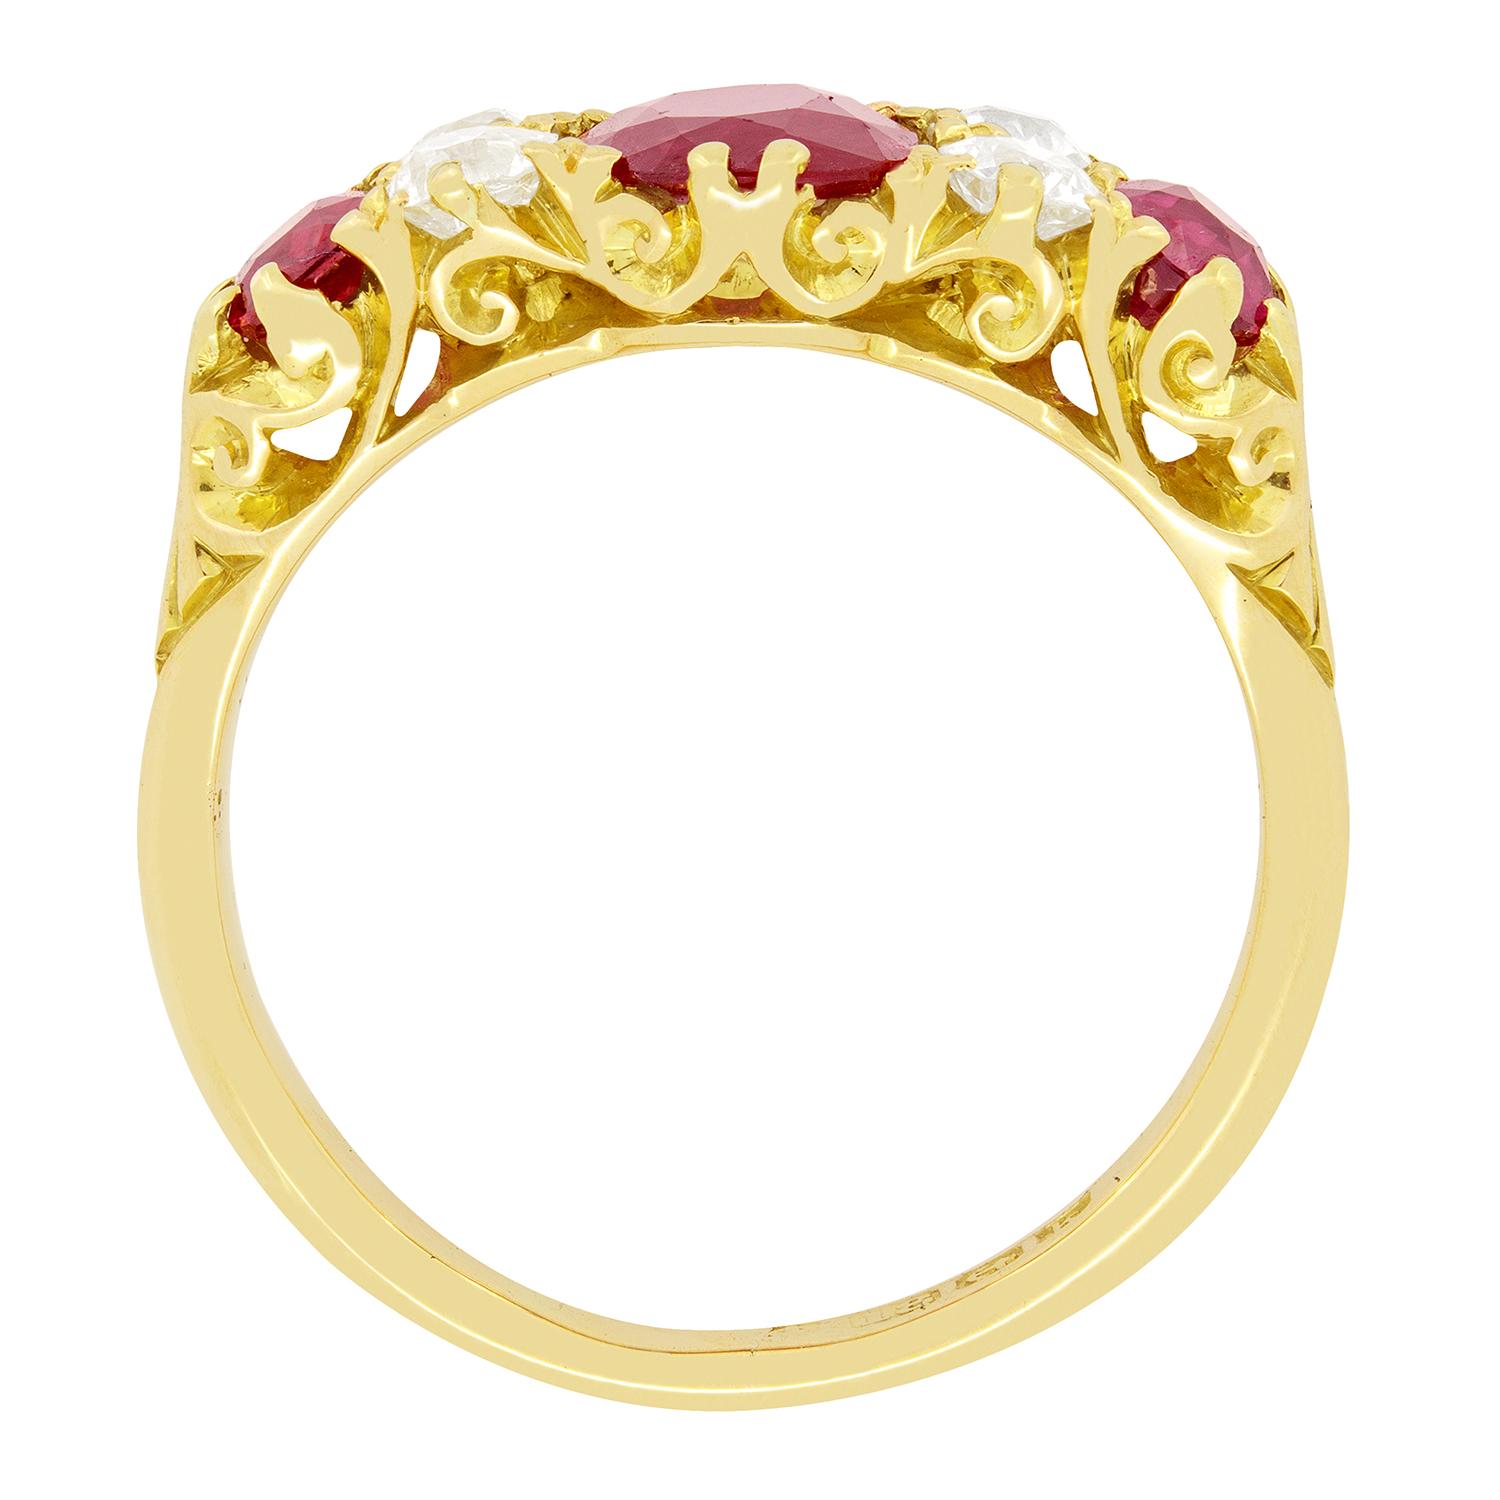 A trio of gorgeously coloured rubies are in prominent display in this Edwardian ring. The central ruby is the biggest at 0.80 carat, whilst the ones at each end are 0.30 carat a piece. In between these rubies are four old cut diamonds, claw set in